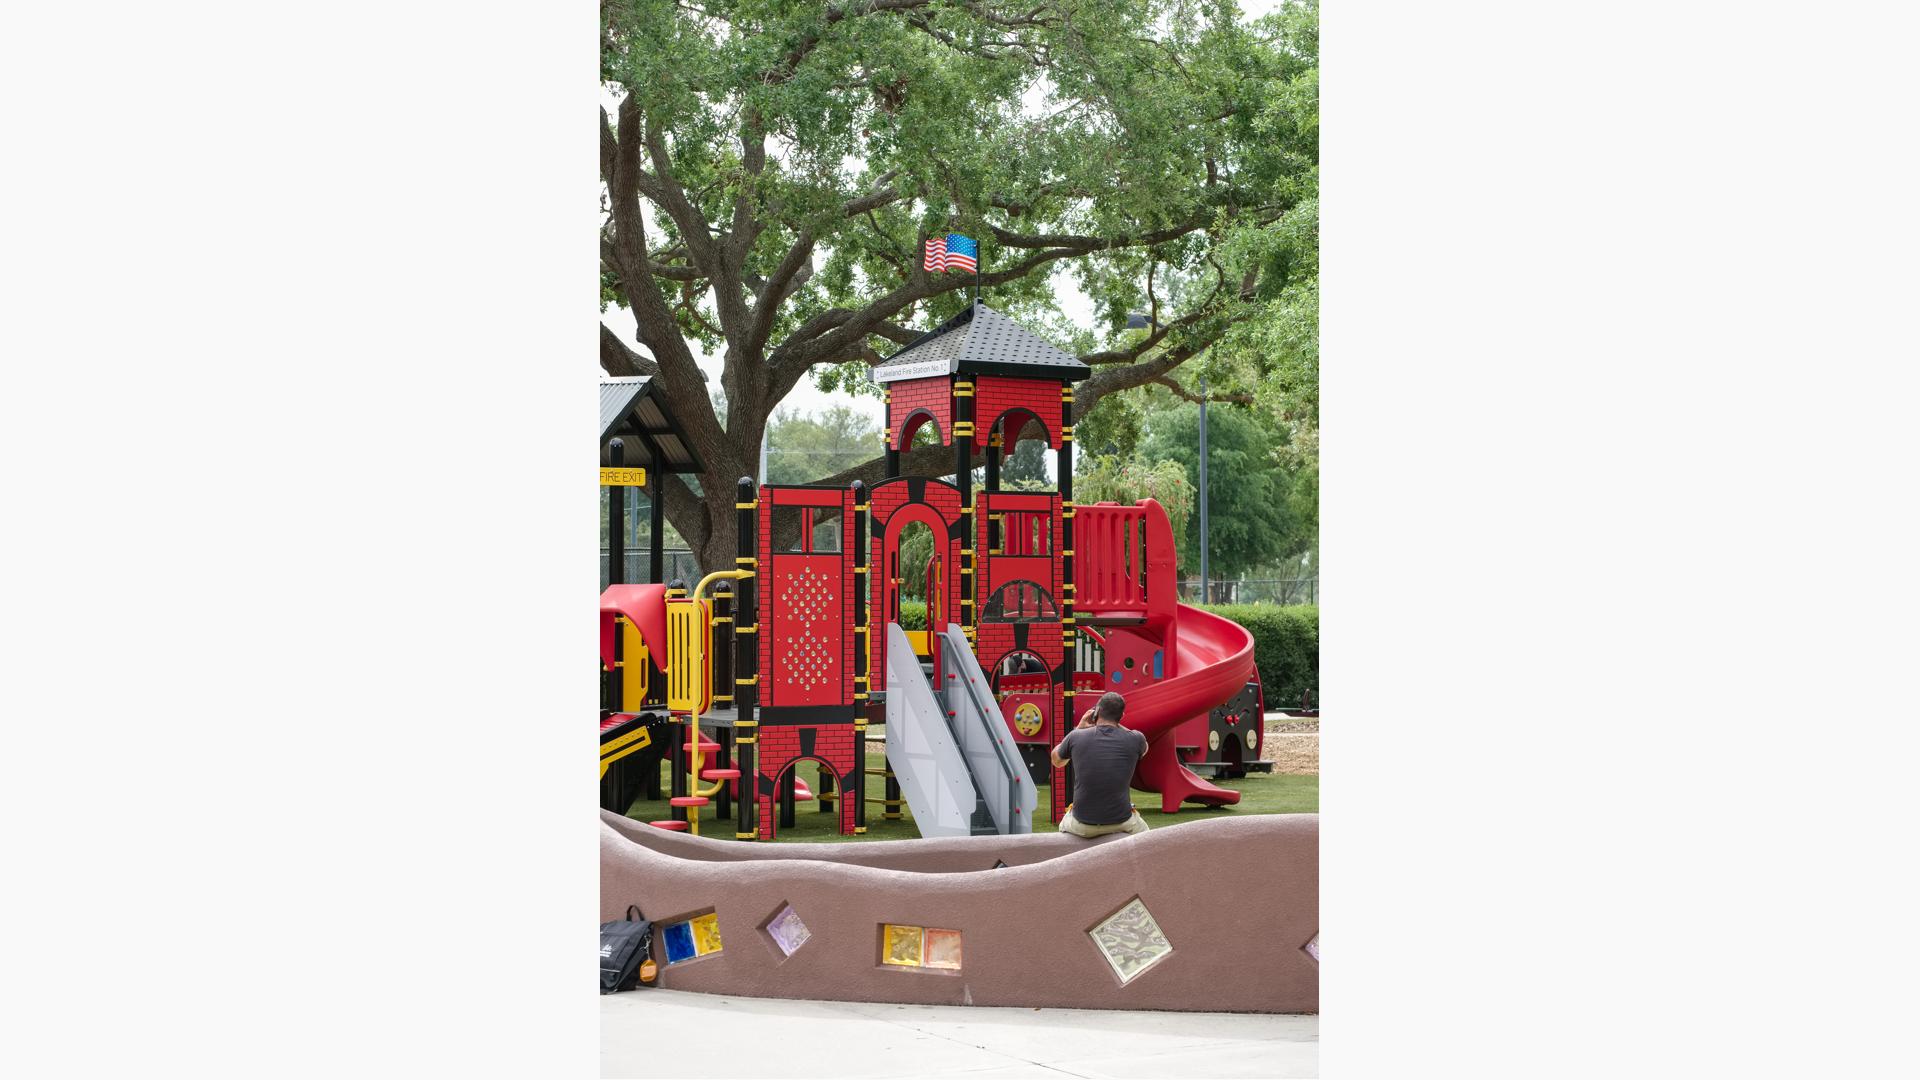 Man sitting in front of Common Ground play structure